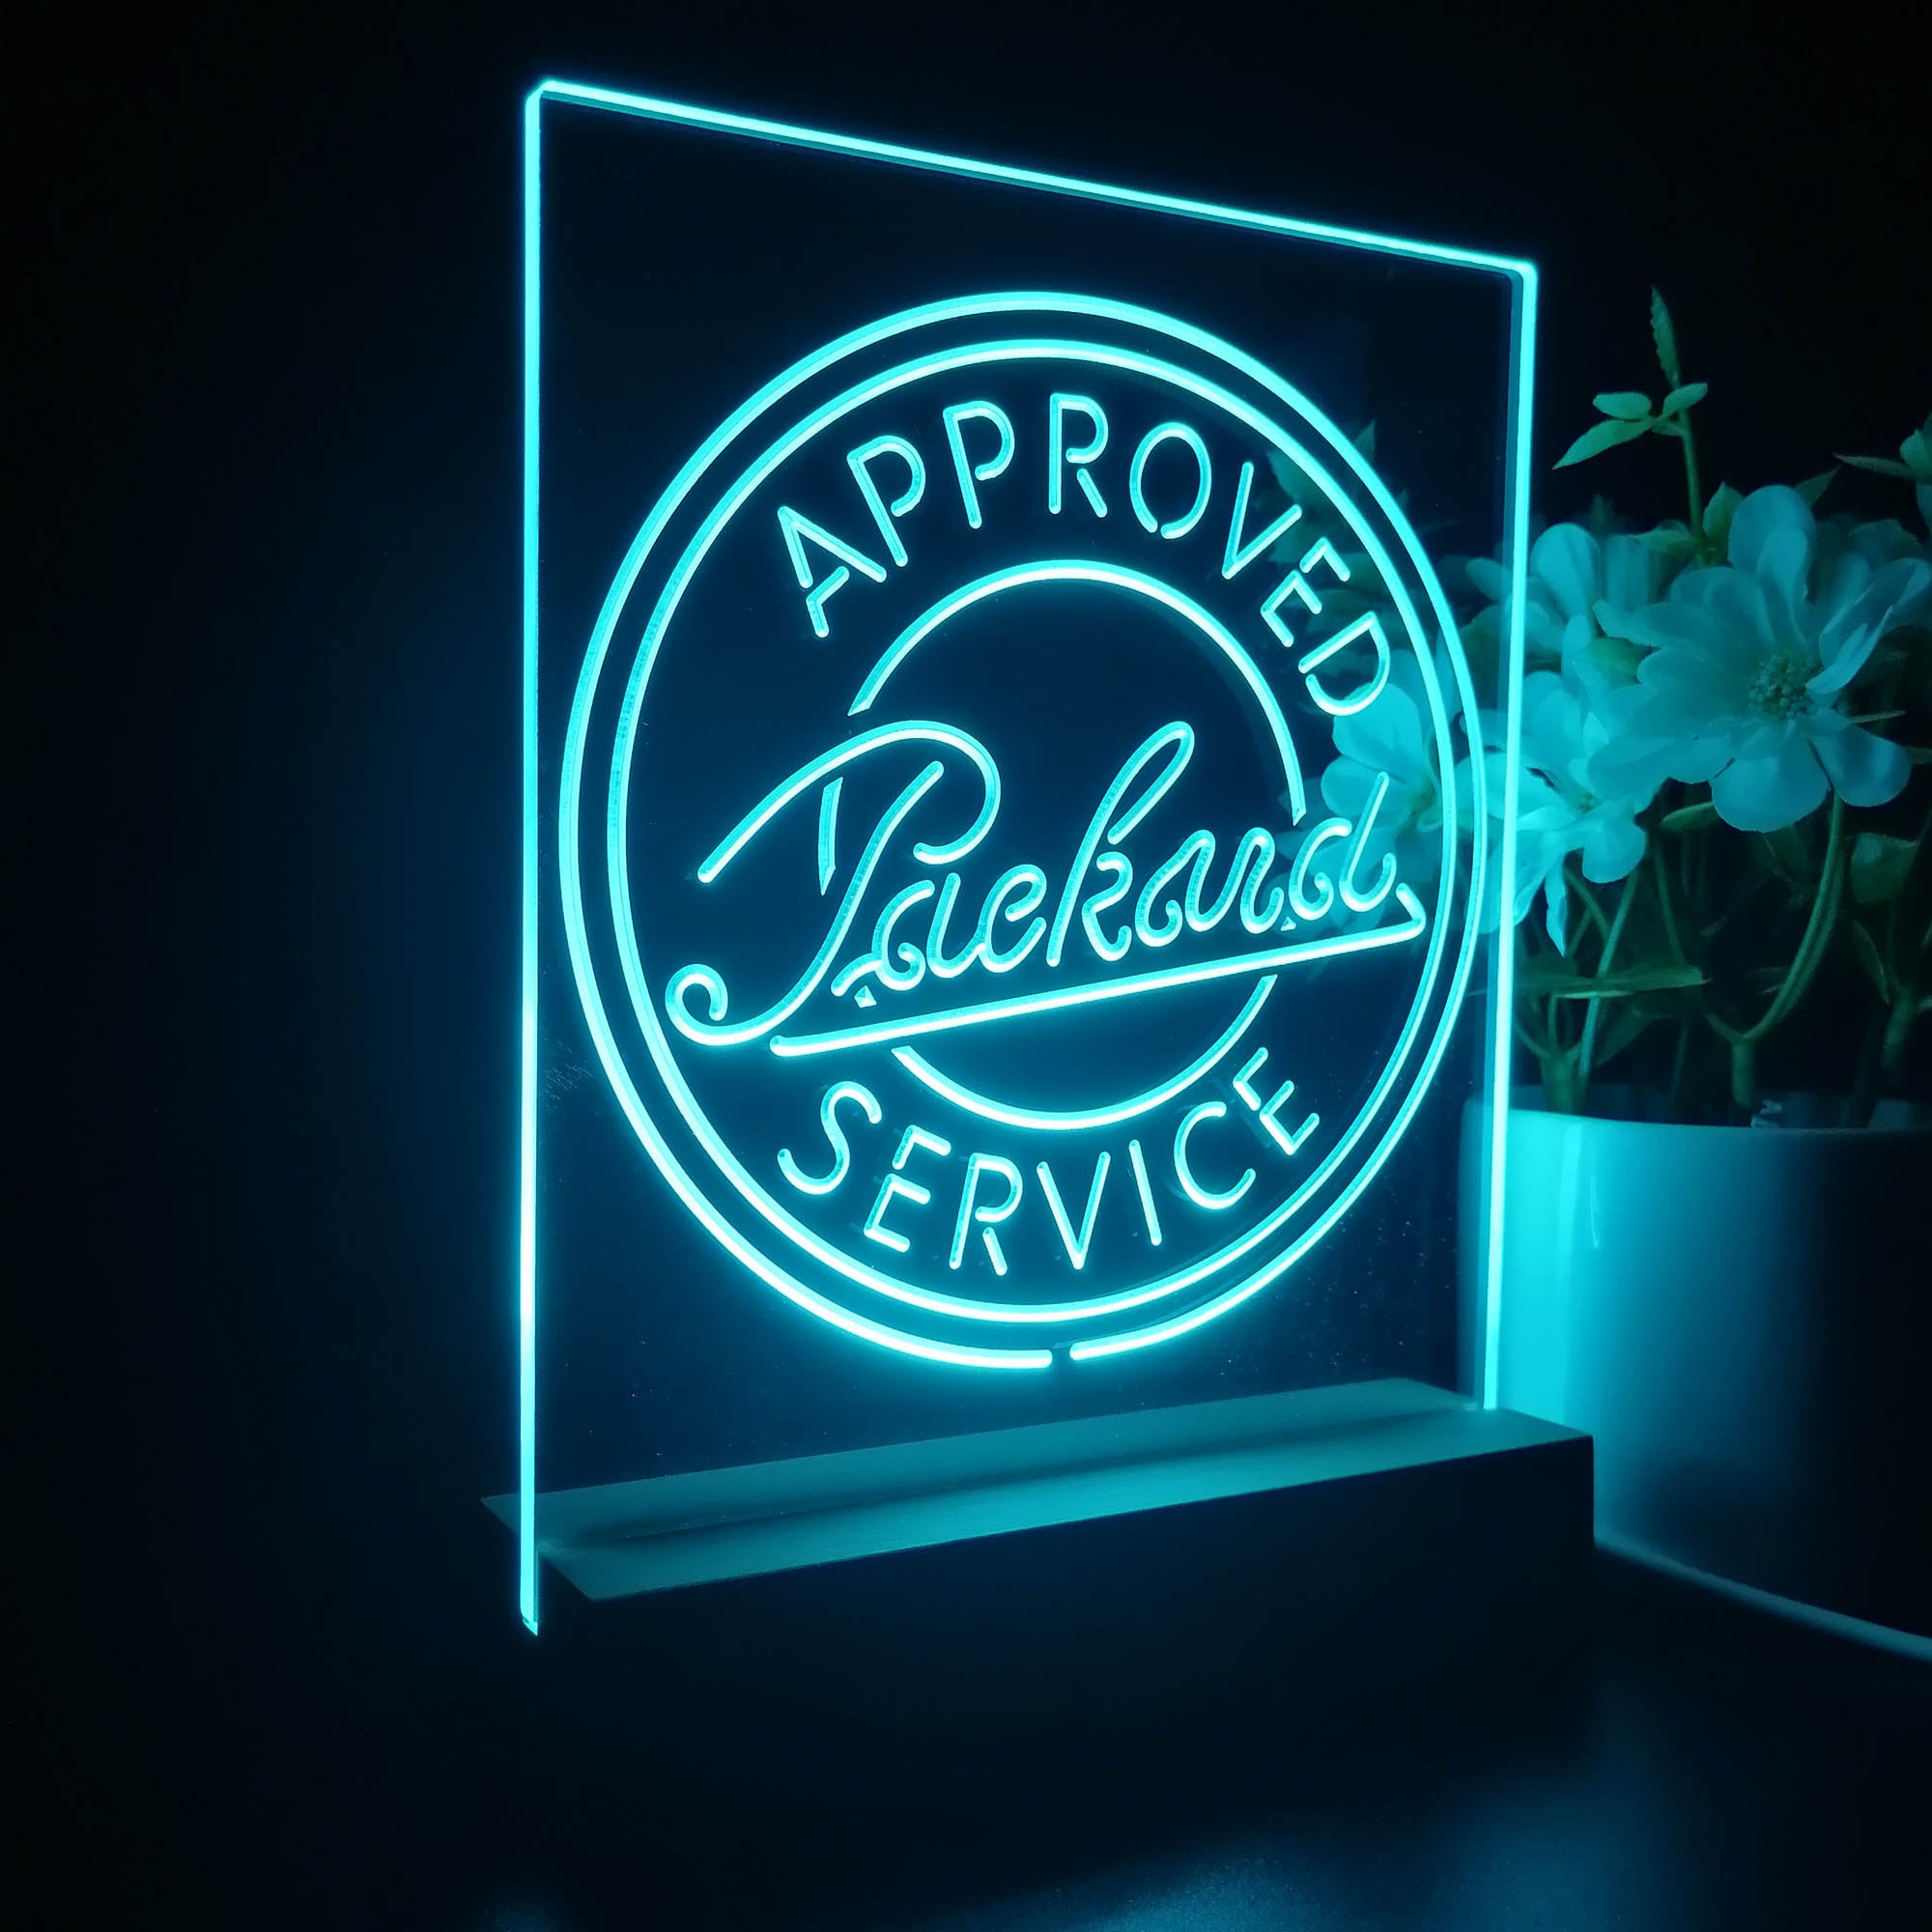 Approved Packard Service Garage Night Light LED Sign